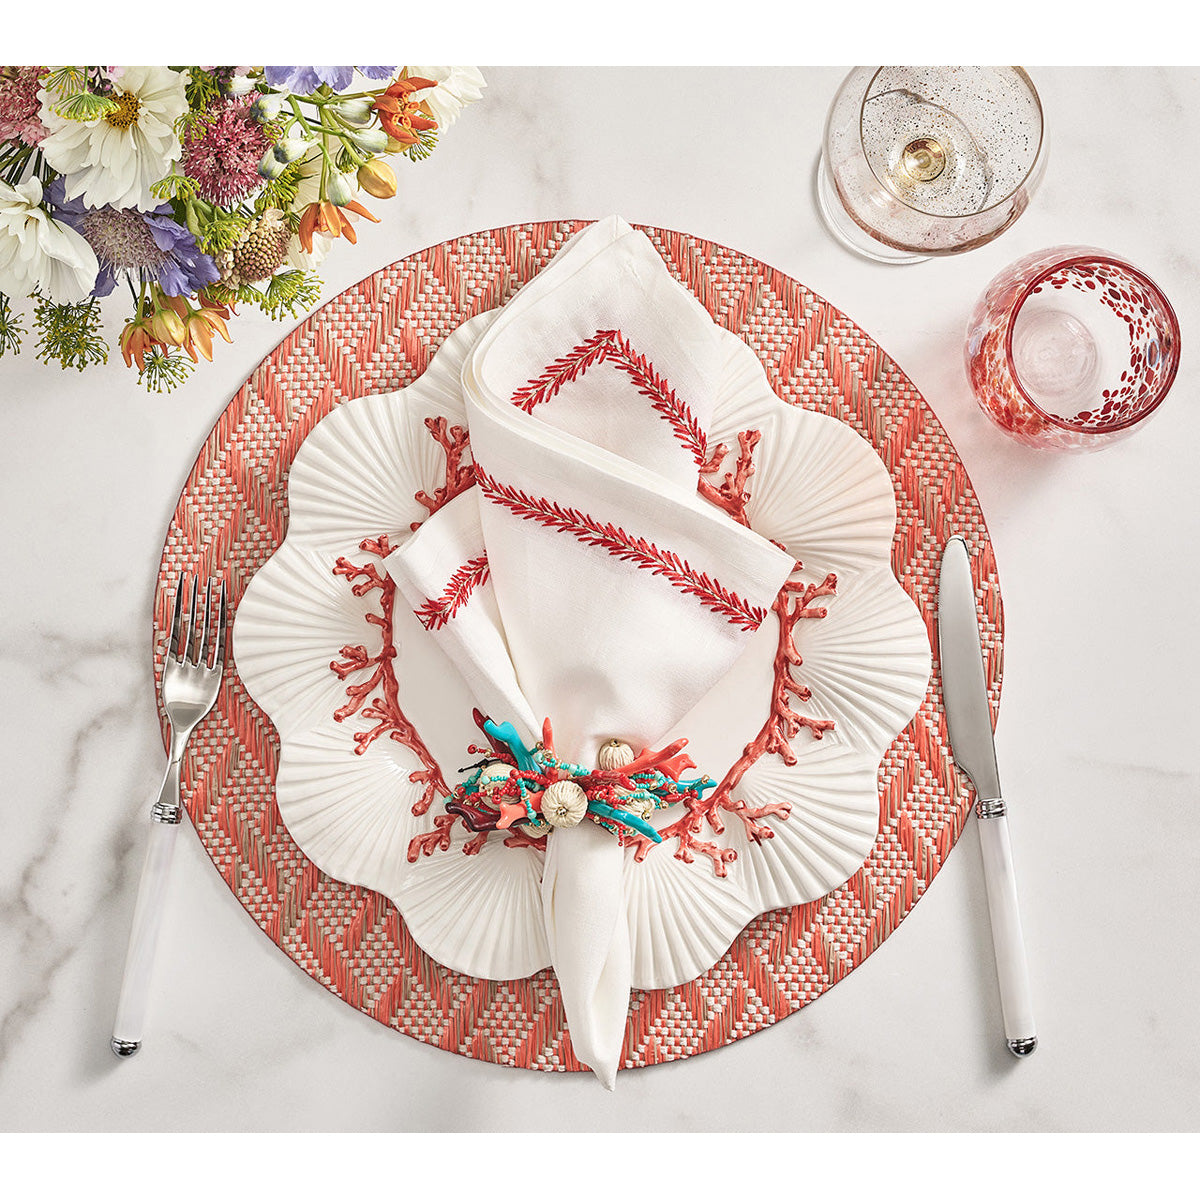 Basketweave Placemat - Set of 4 by Kim Seybert Additional Image-23